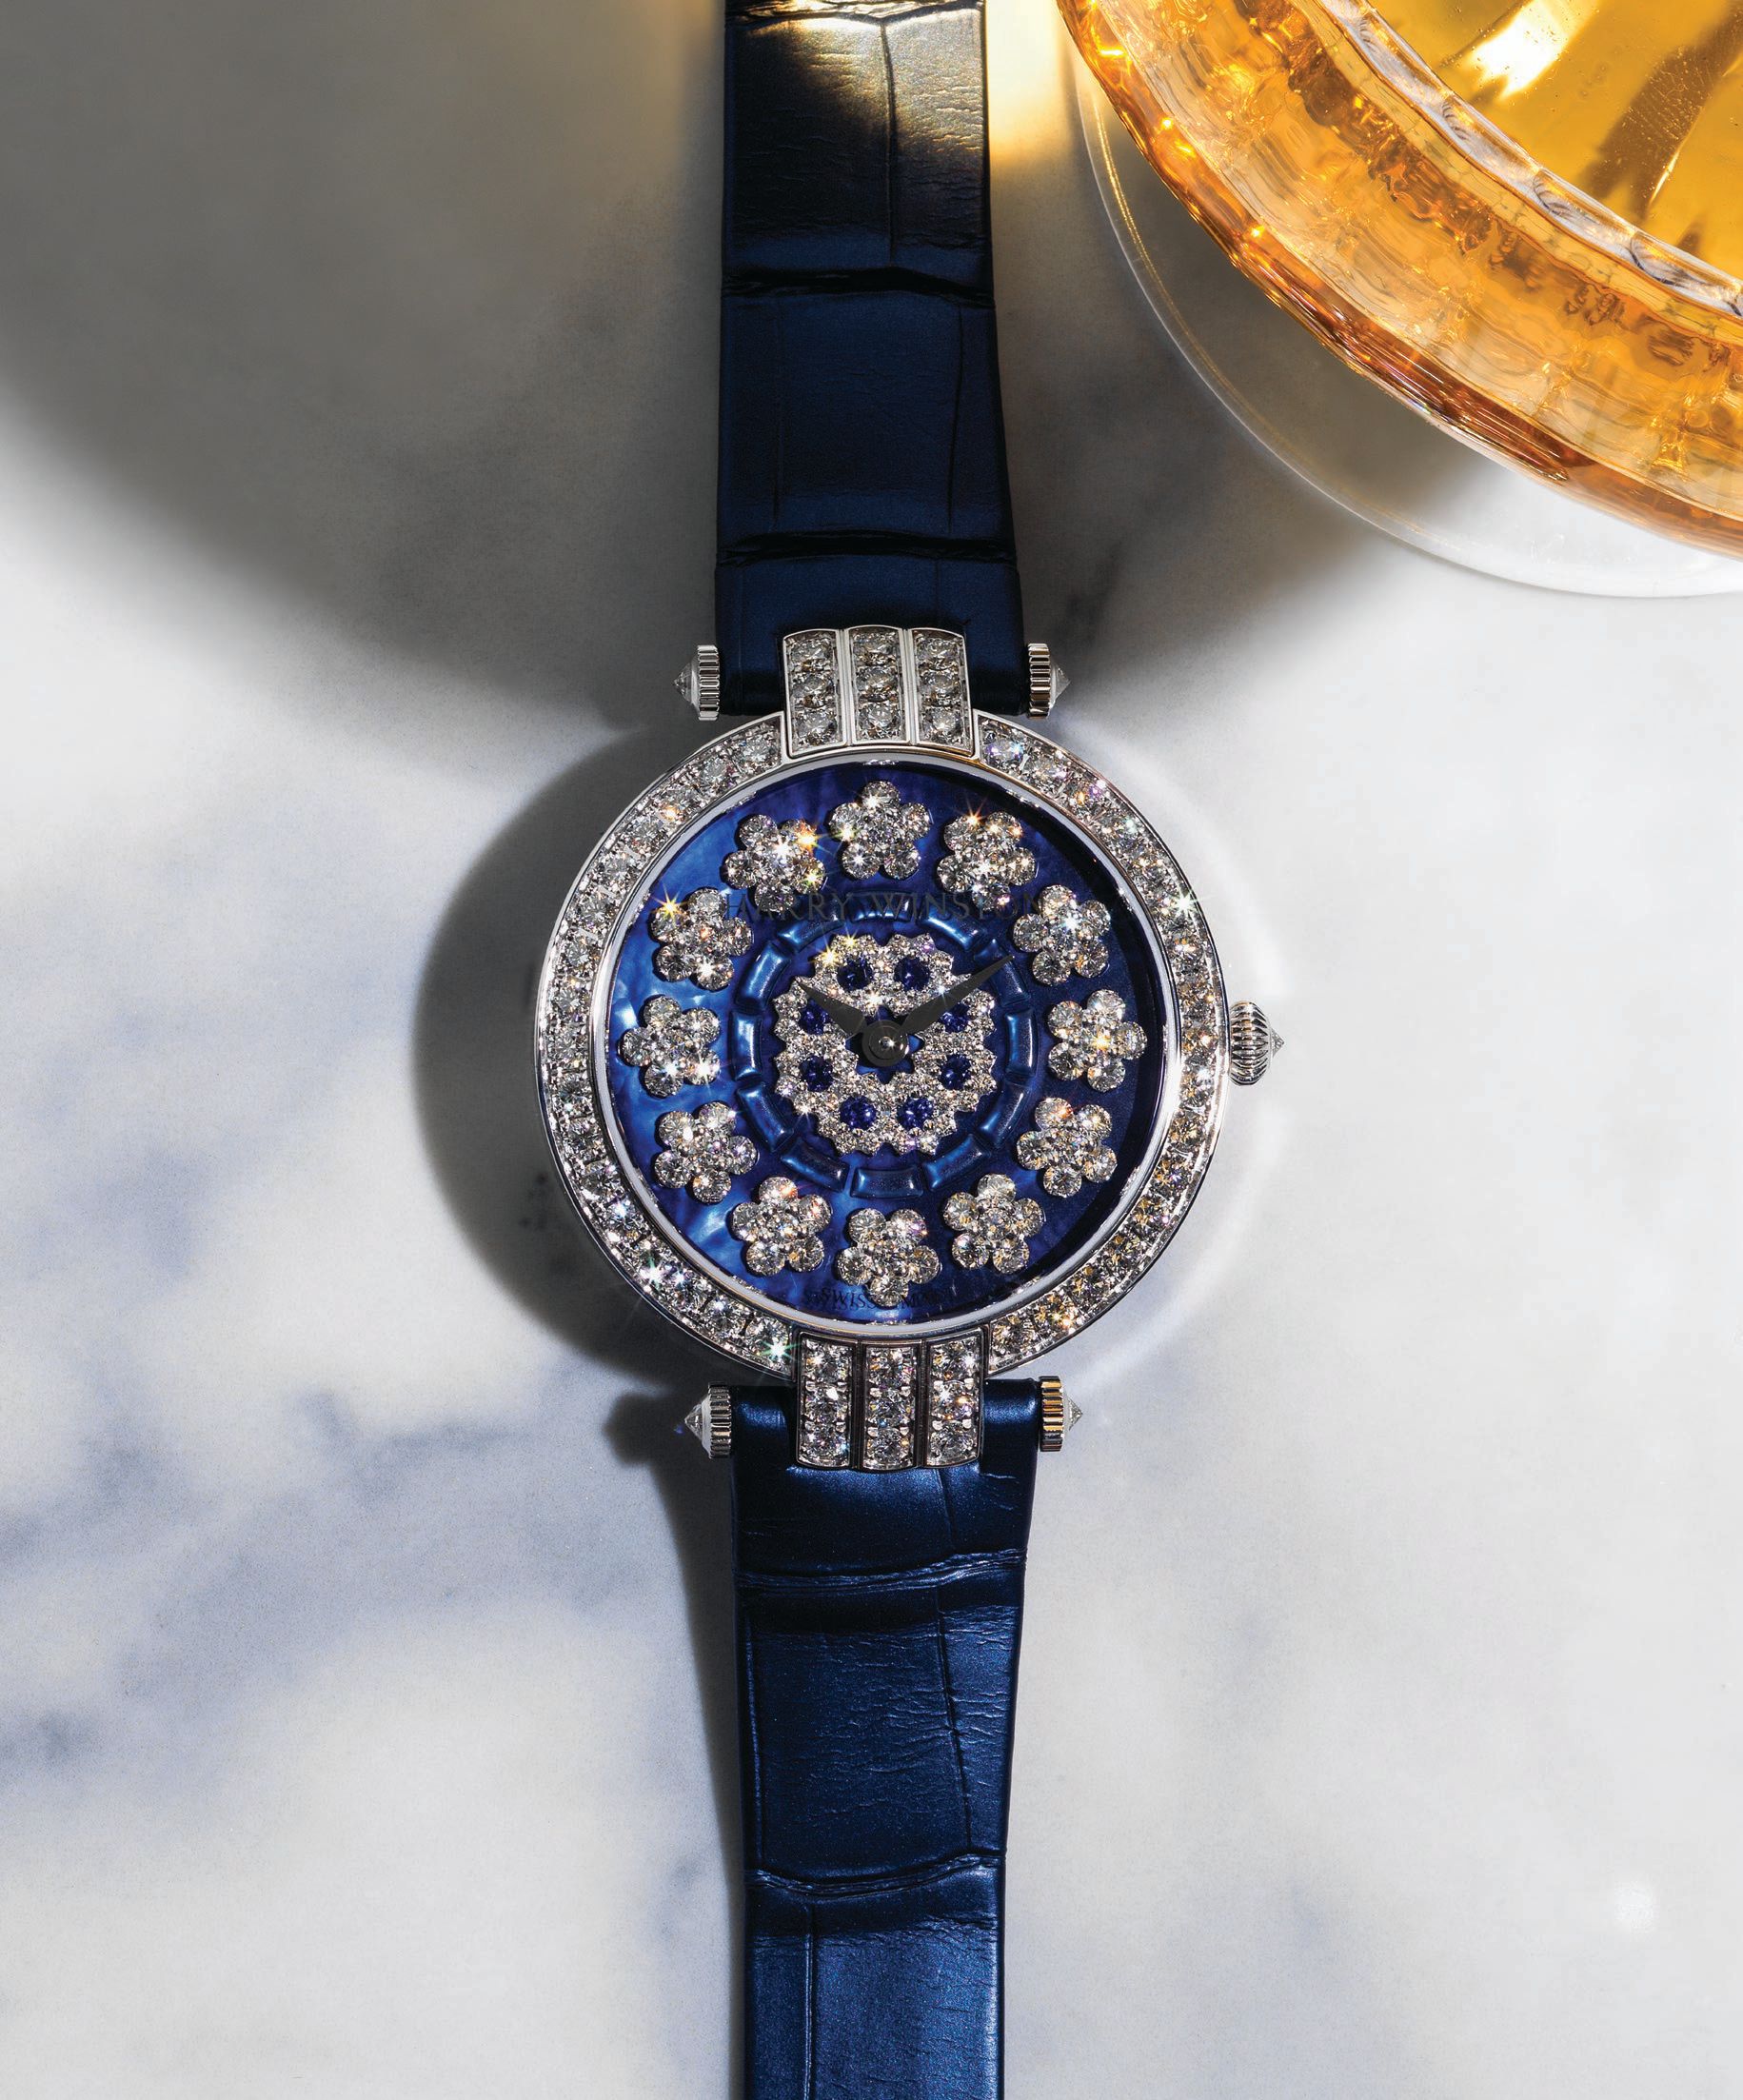 Harry Winston Premier Sunflower timepiece featuring diamonds set in 18K white gold, harrywinston.com PHOTOGRAPHED BY BRIAN KLUTCH STYLED BY FAYE POWER VANDE VREDE